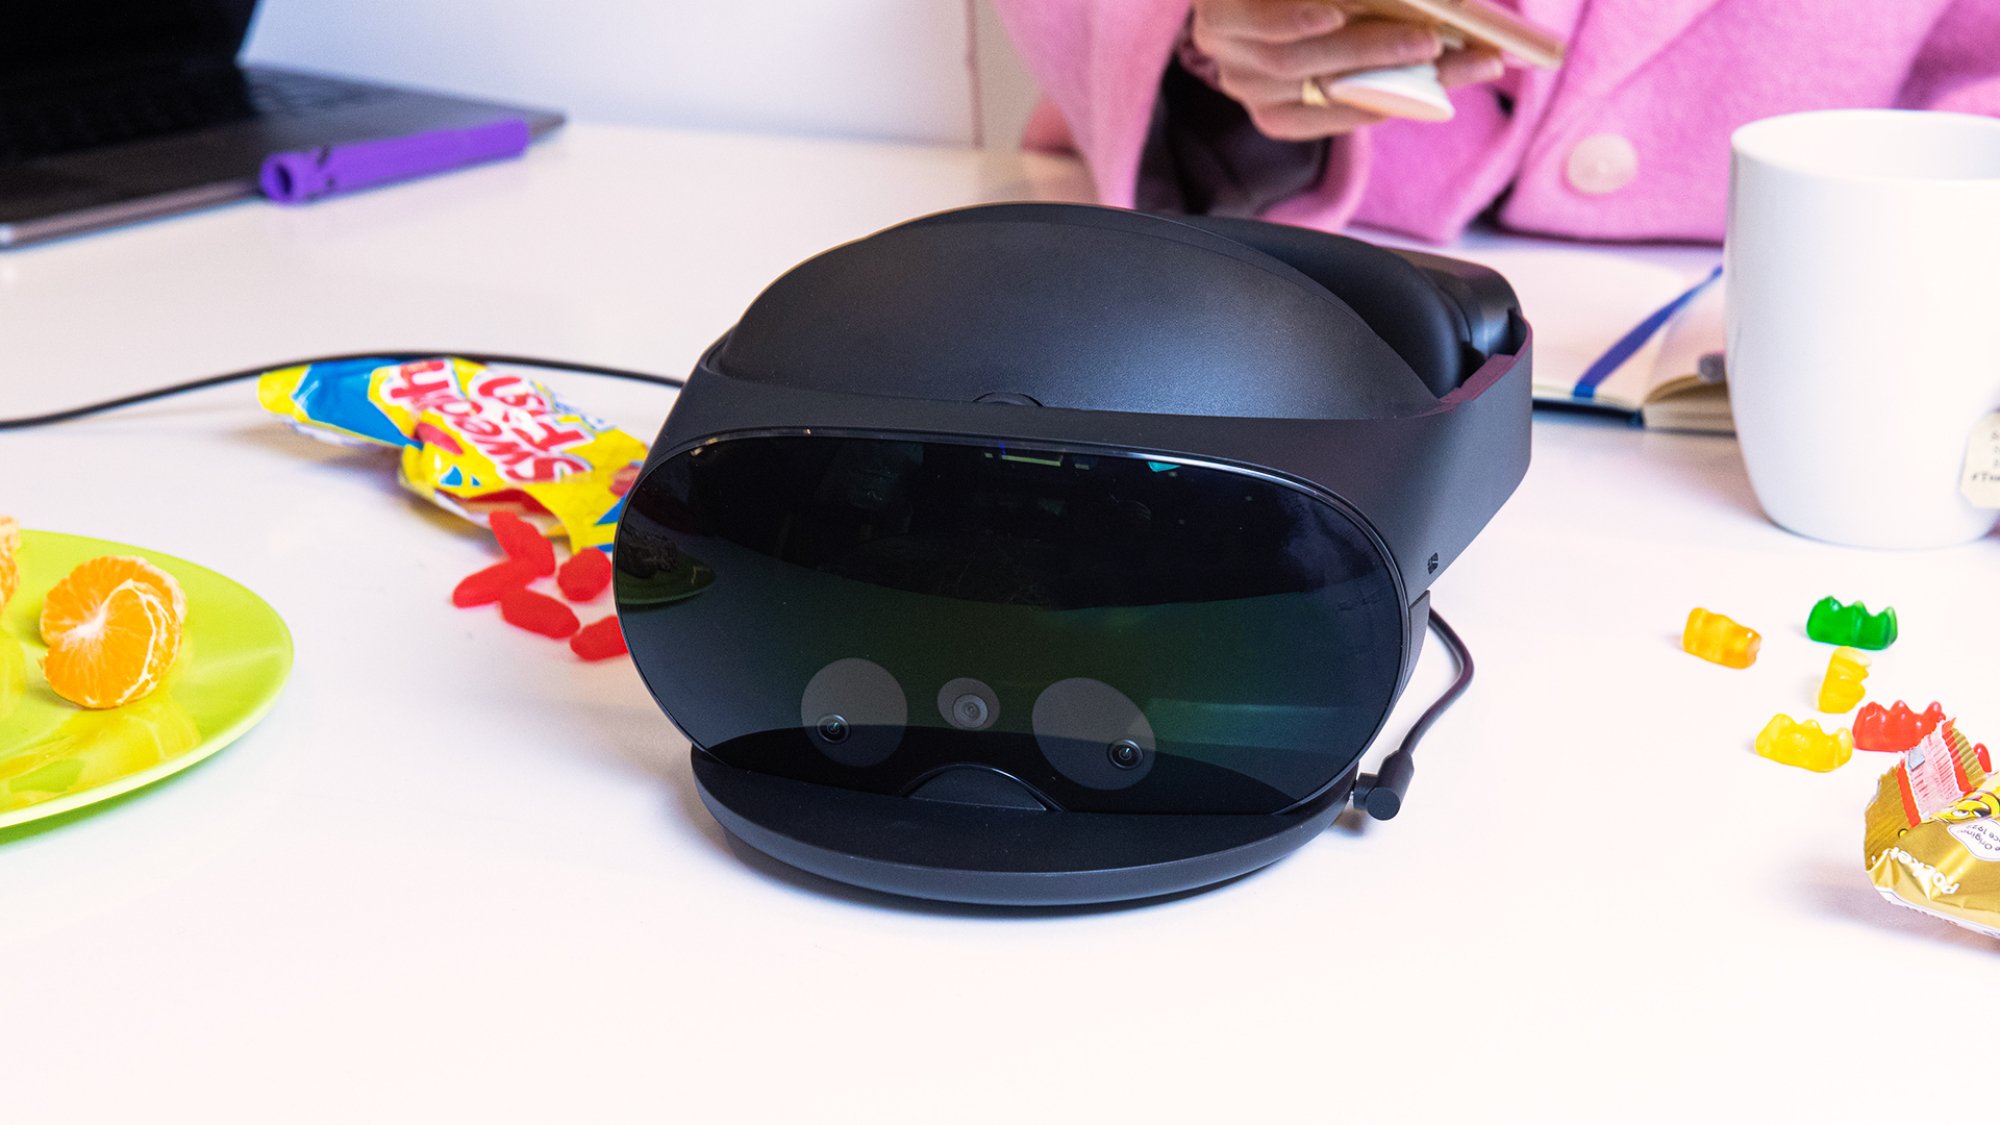 The Quest Pro from the front, charging in its dock. It is surrounded by opened Swedish Fish and Haribo packets.